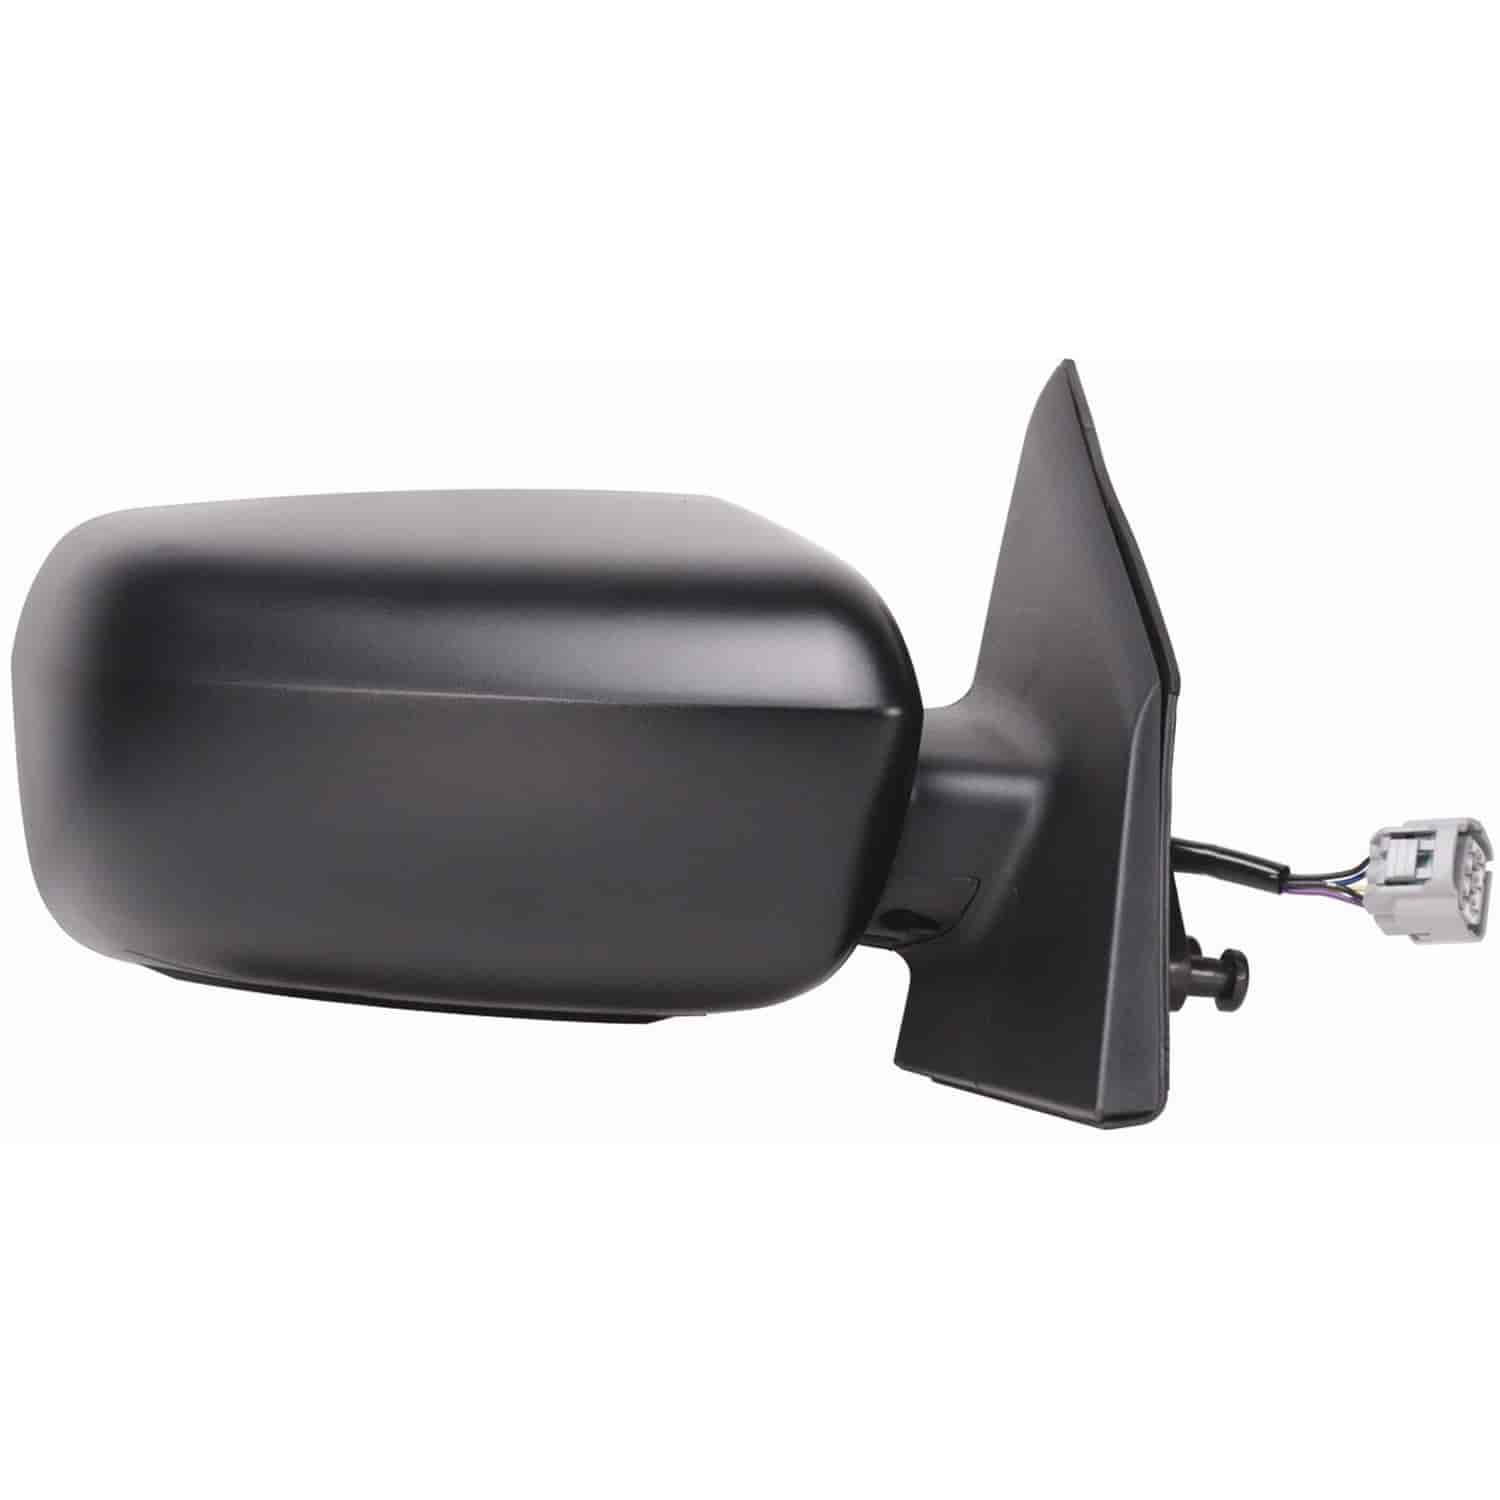 OEM Style Replacement mirror for 04-08 Mitsubishi Galant DE ES GTS LS passenger side mirror tested t